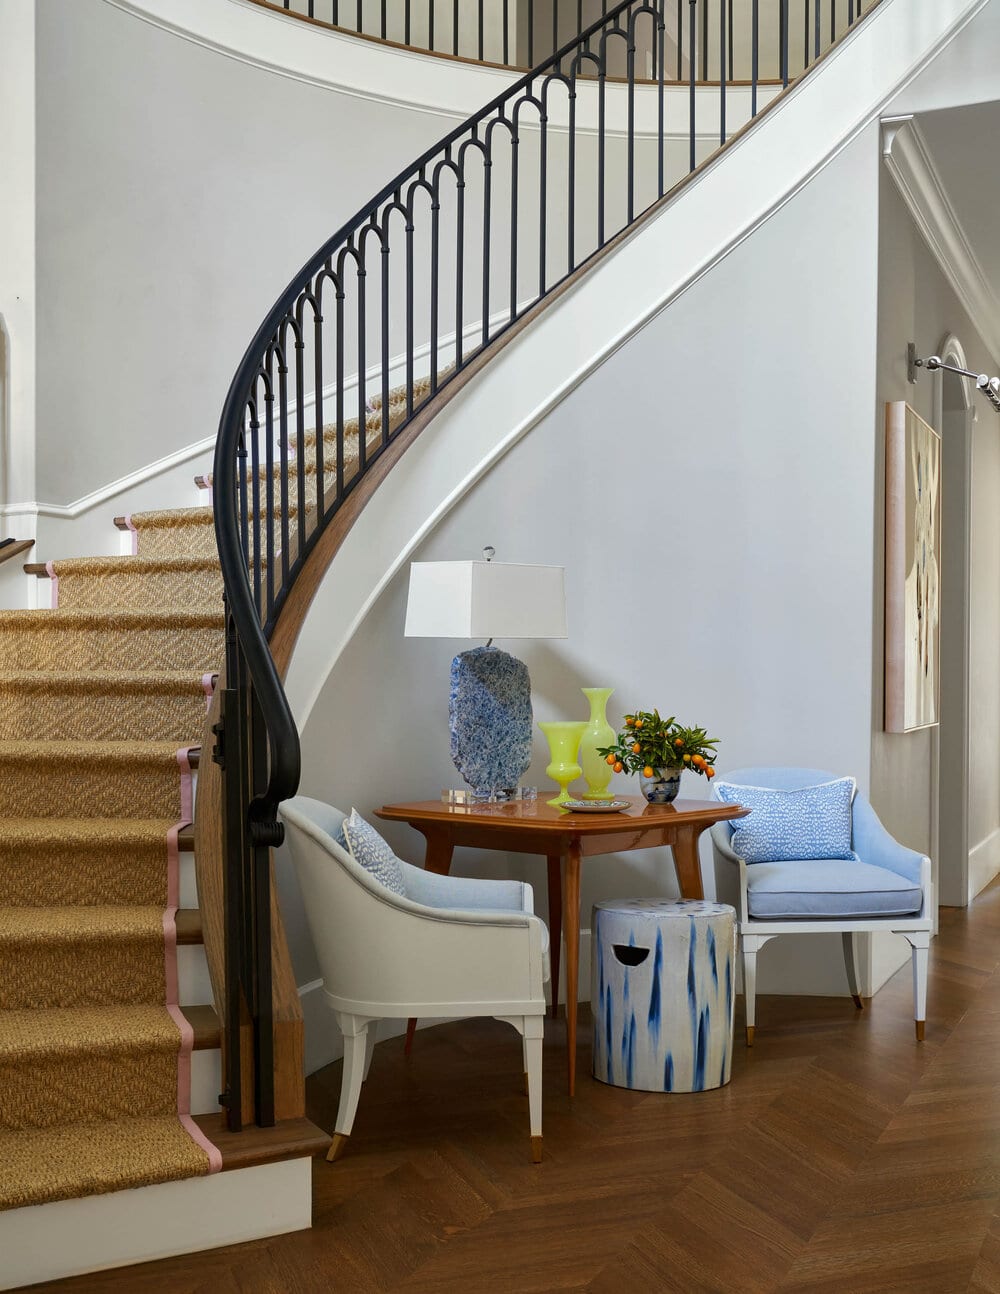 Mary Beth Wagner Interiors - Nathan Schroder Photography - pair of chairs - curved staircase - memorable foyer - entry